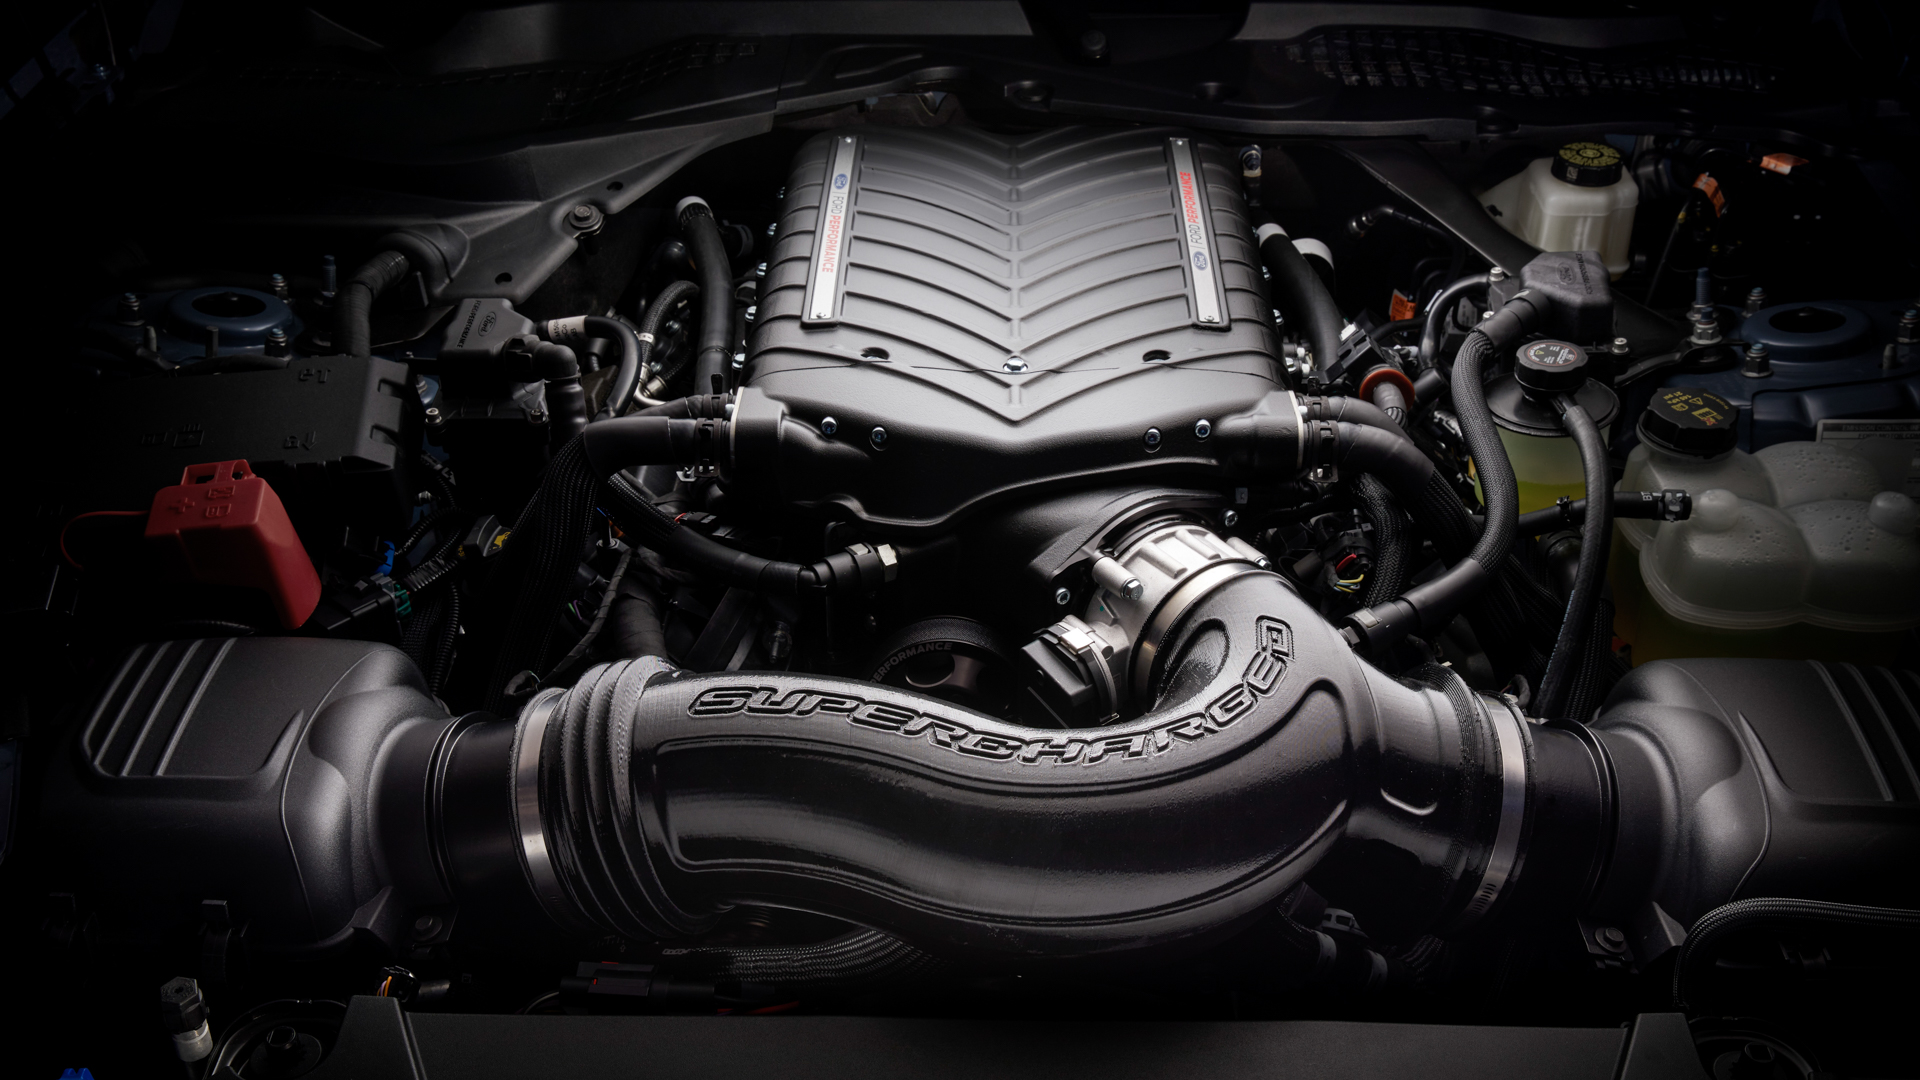 New Ford Mustang V8 Supercharger Kit Gives You 800 HP and a Warranty